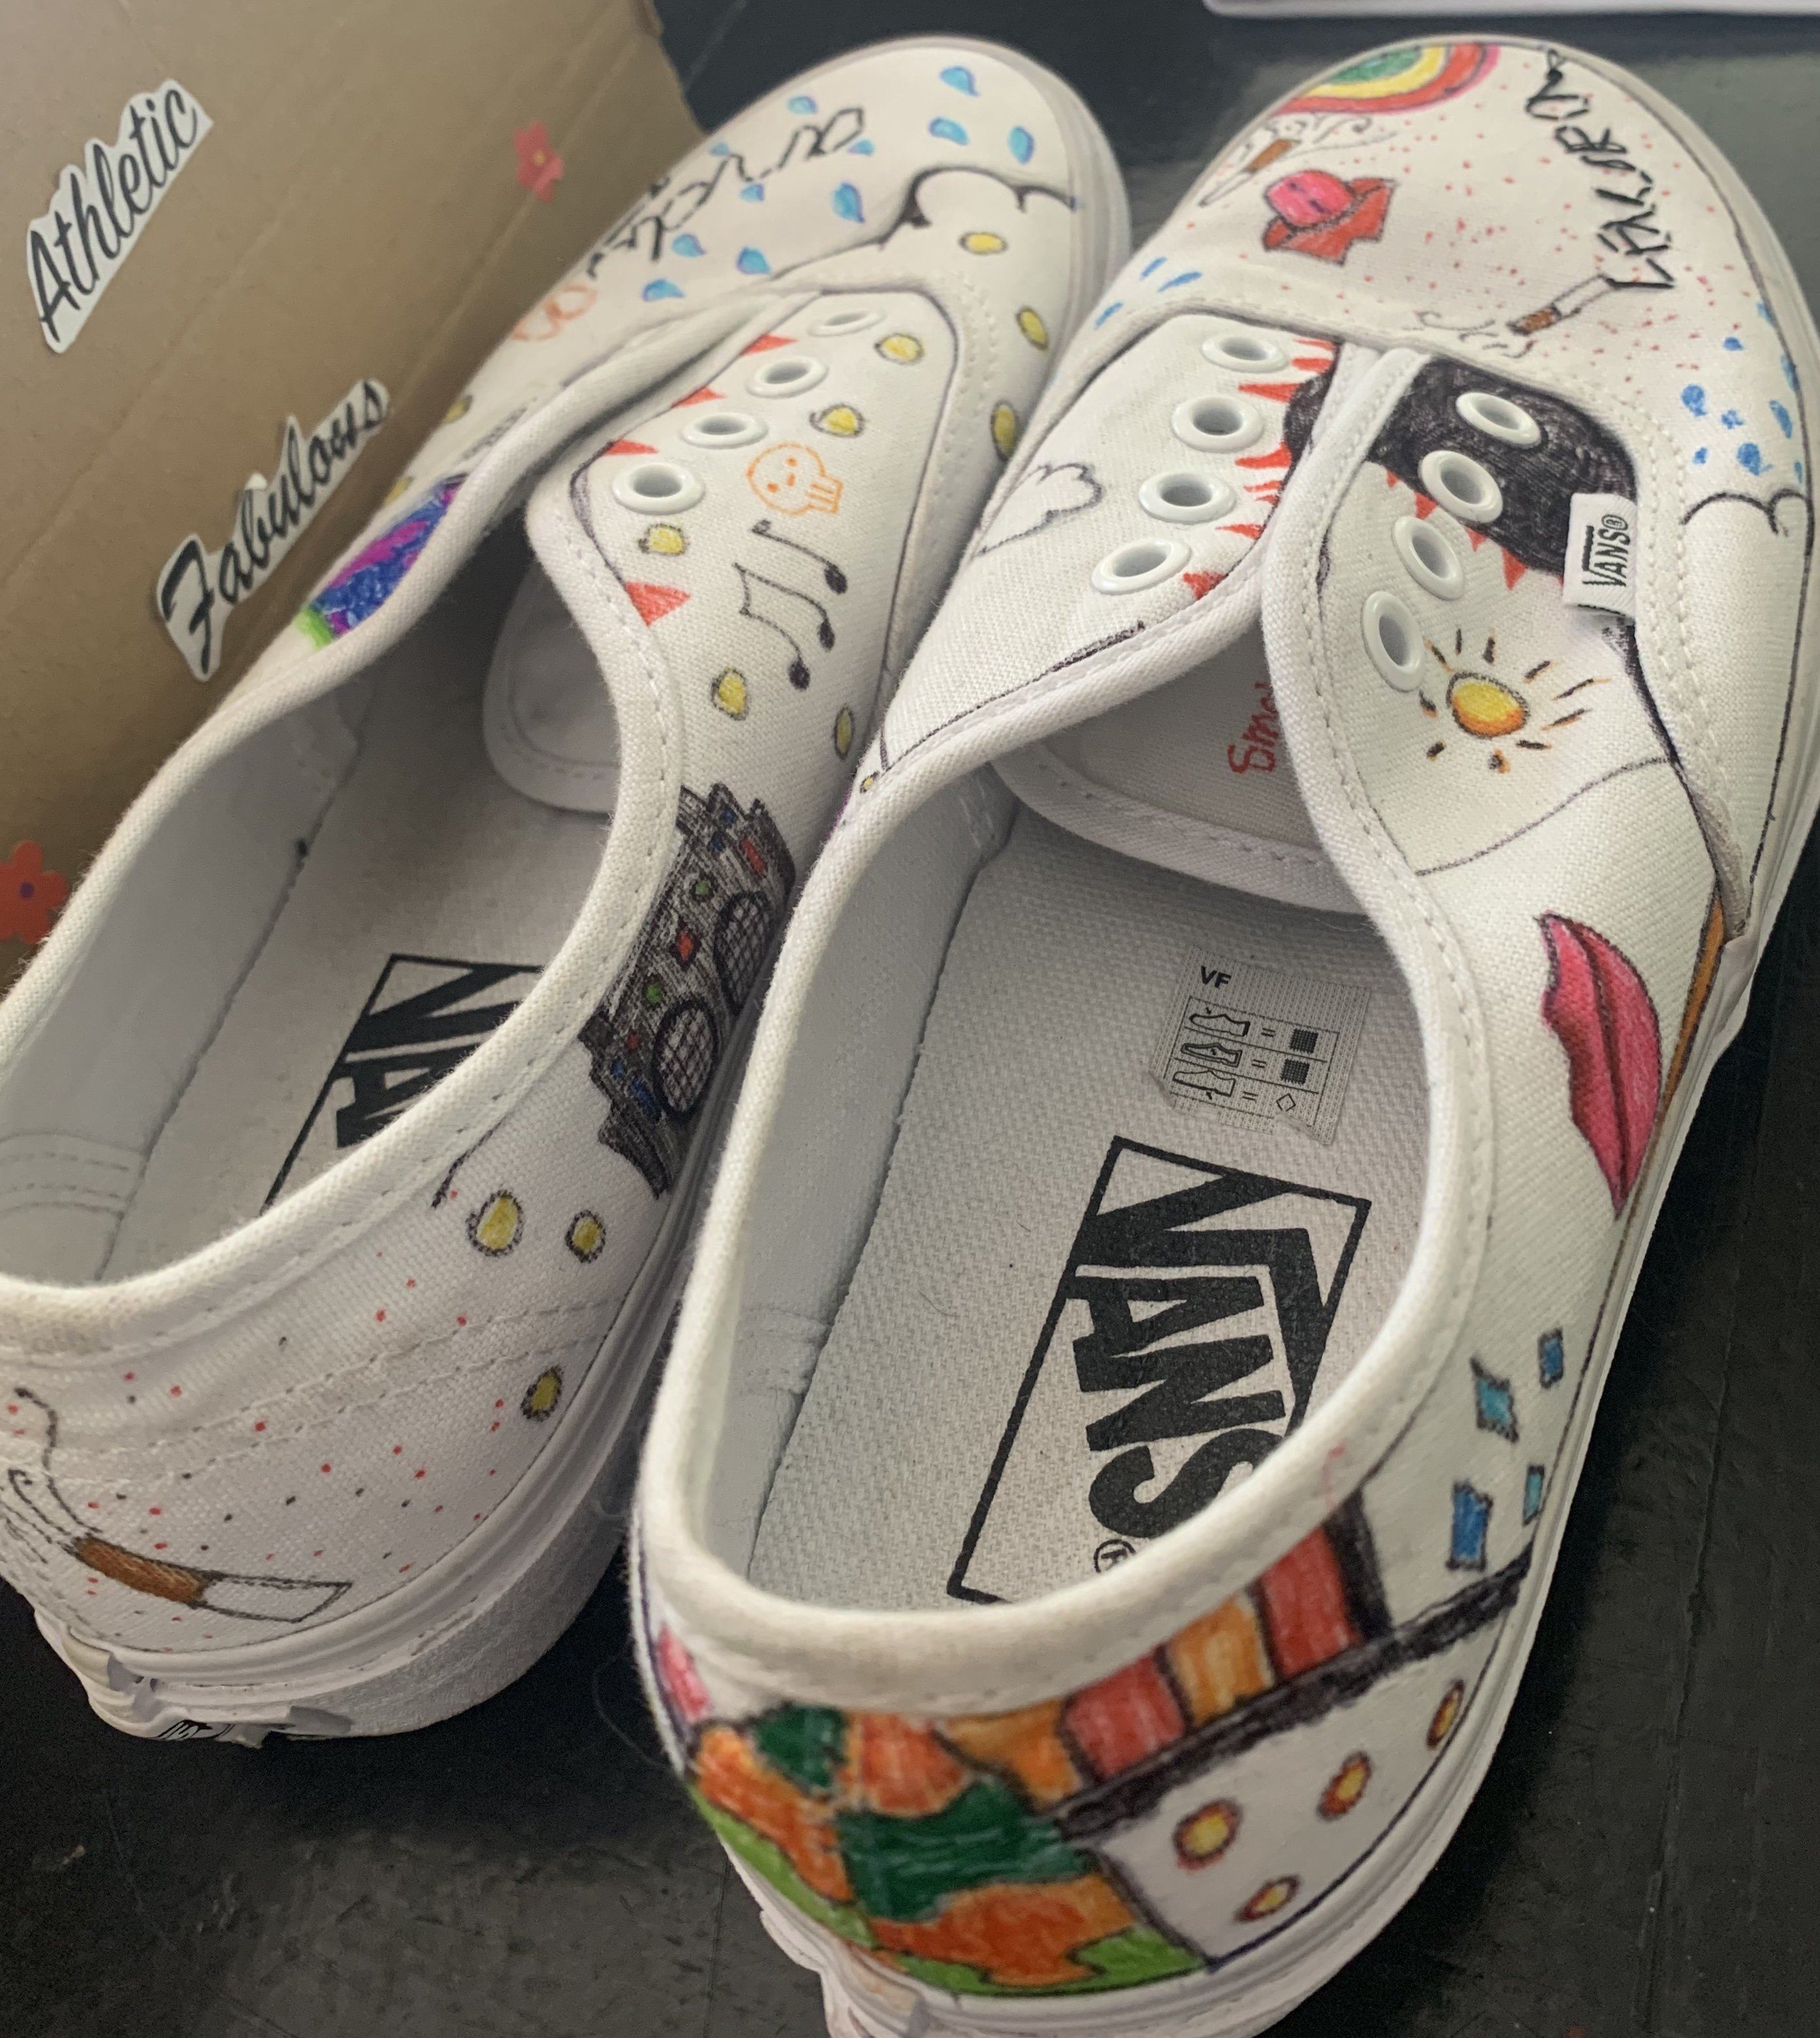 Summer Activity: Decorating Shoes